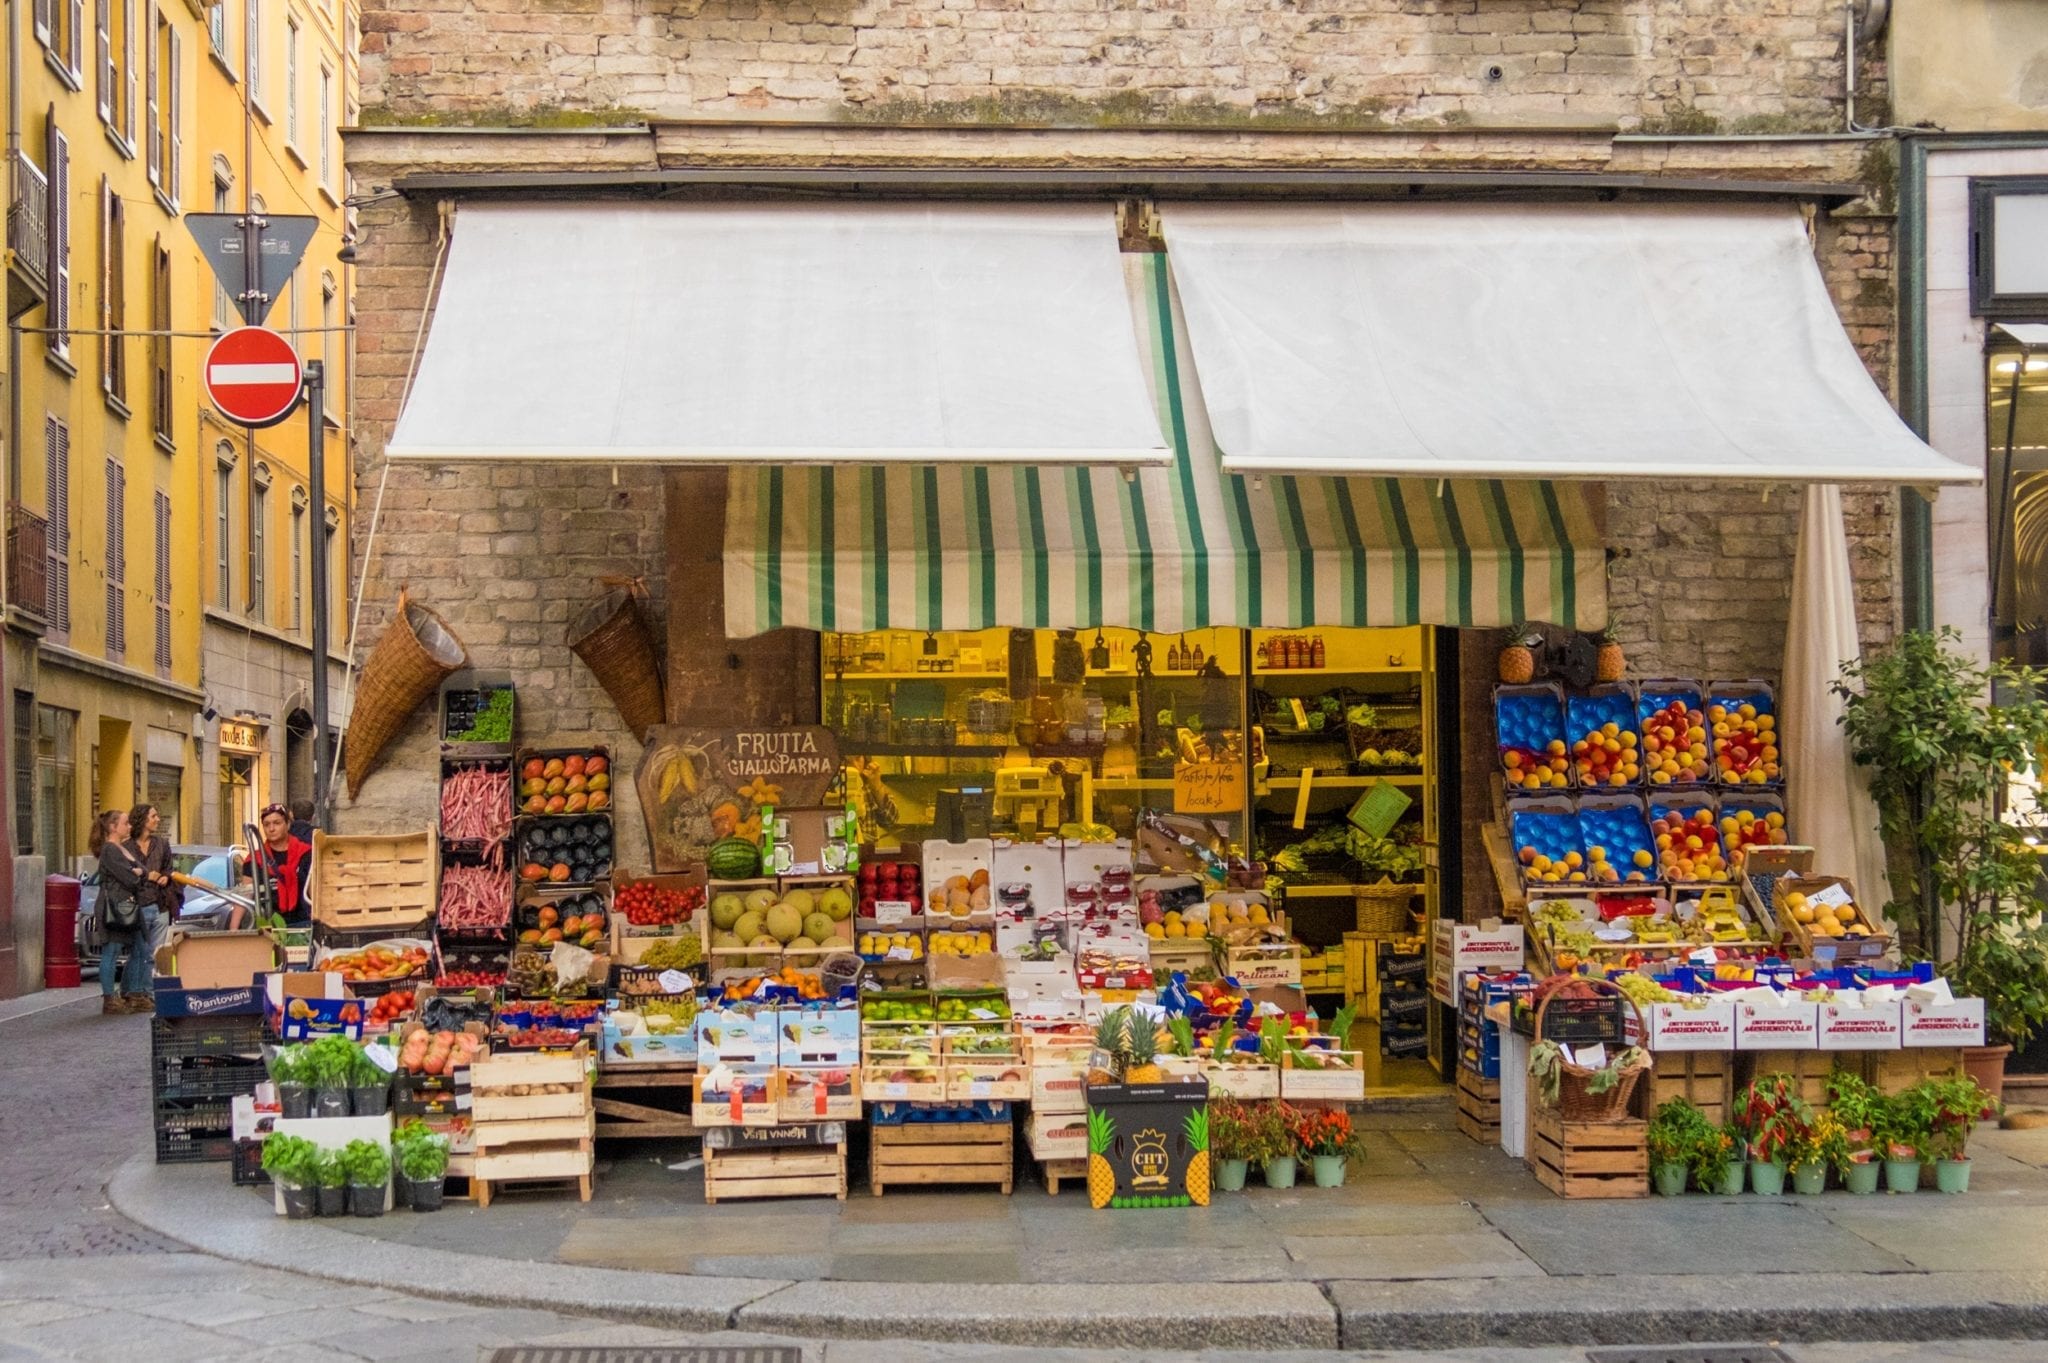 A fruit stand brimming with piles of fruits and vegetables in Parma, Italy.